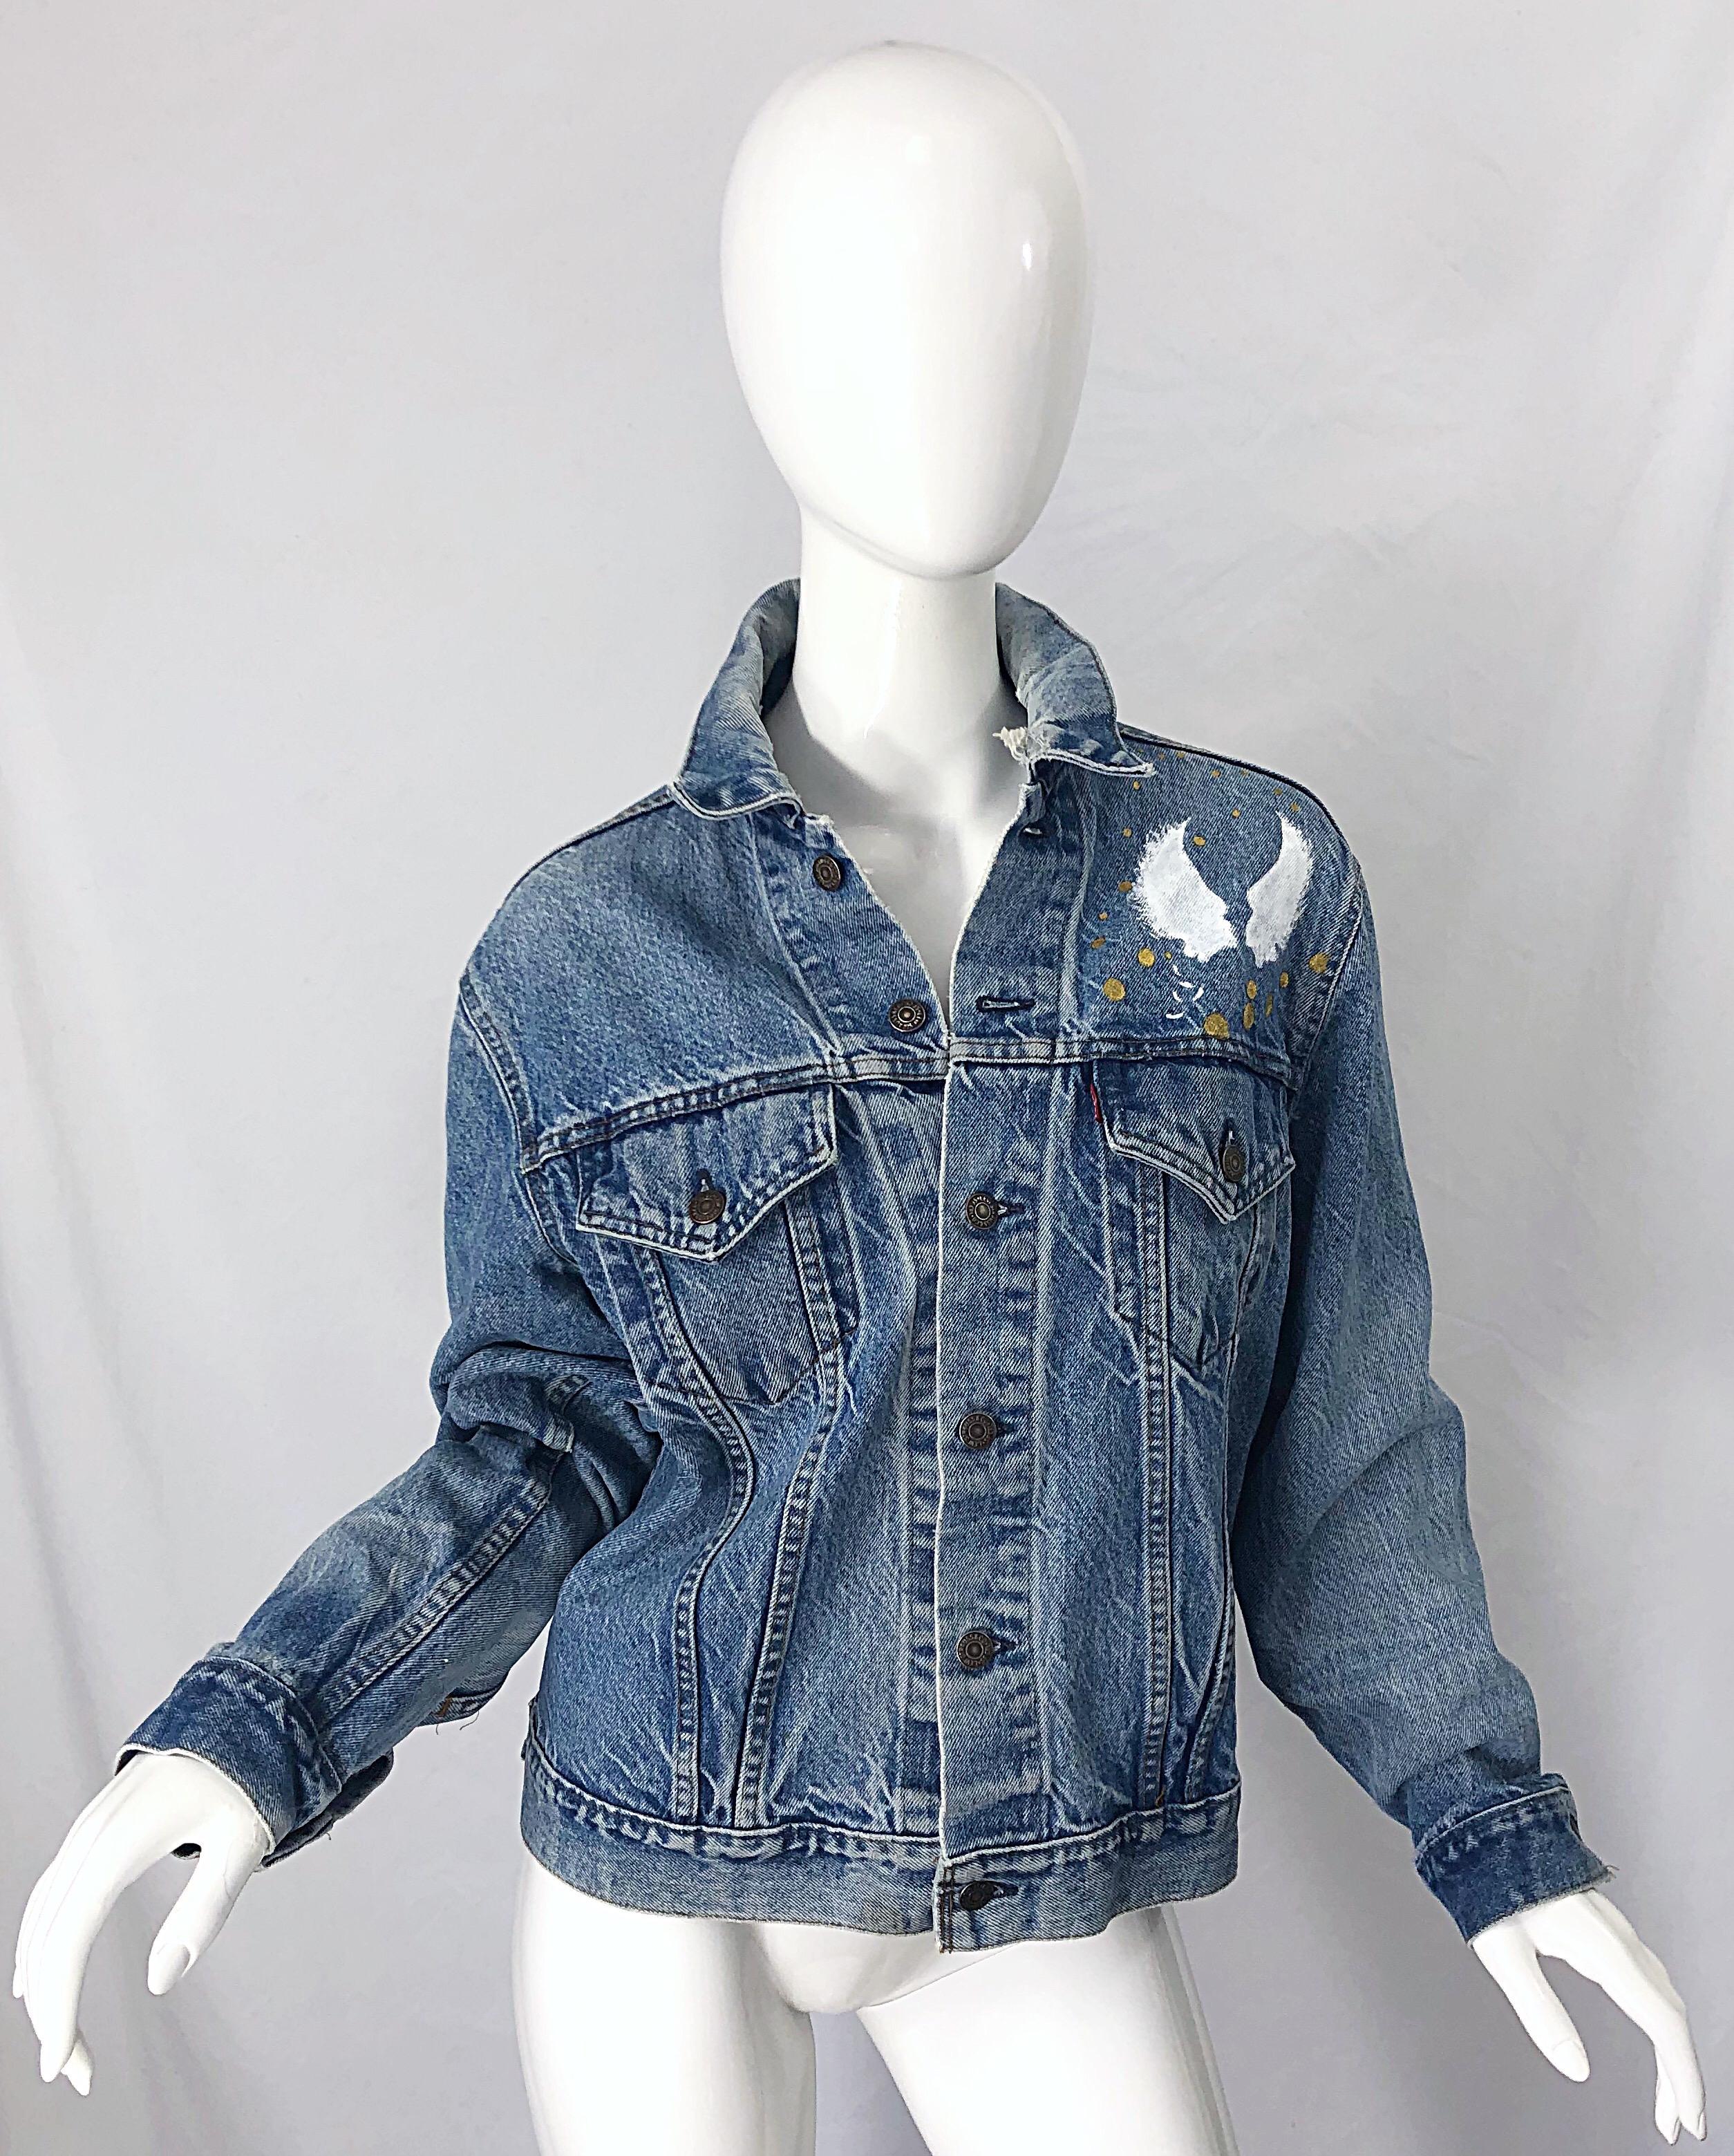 Amazing one of a kind artist hand painted 'City of Angels' unisex vintage blue jean jacket ! Angel wings in white on the top left corner of the front. Large angel hand painted on the back with the sun and moon. Crosses and polka dots in metallic